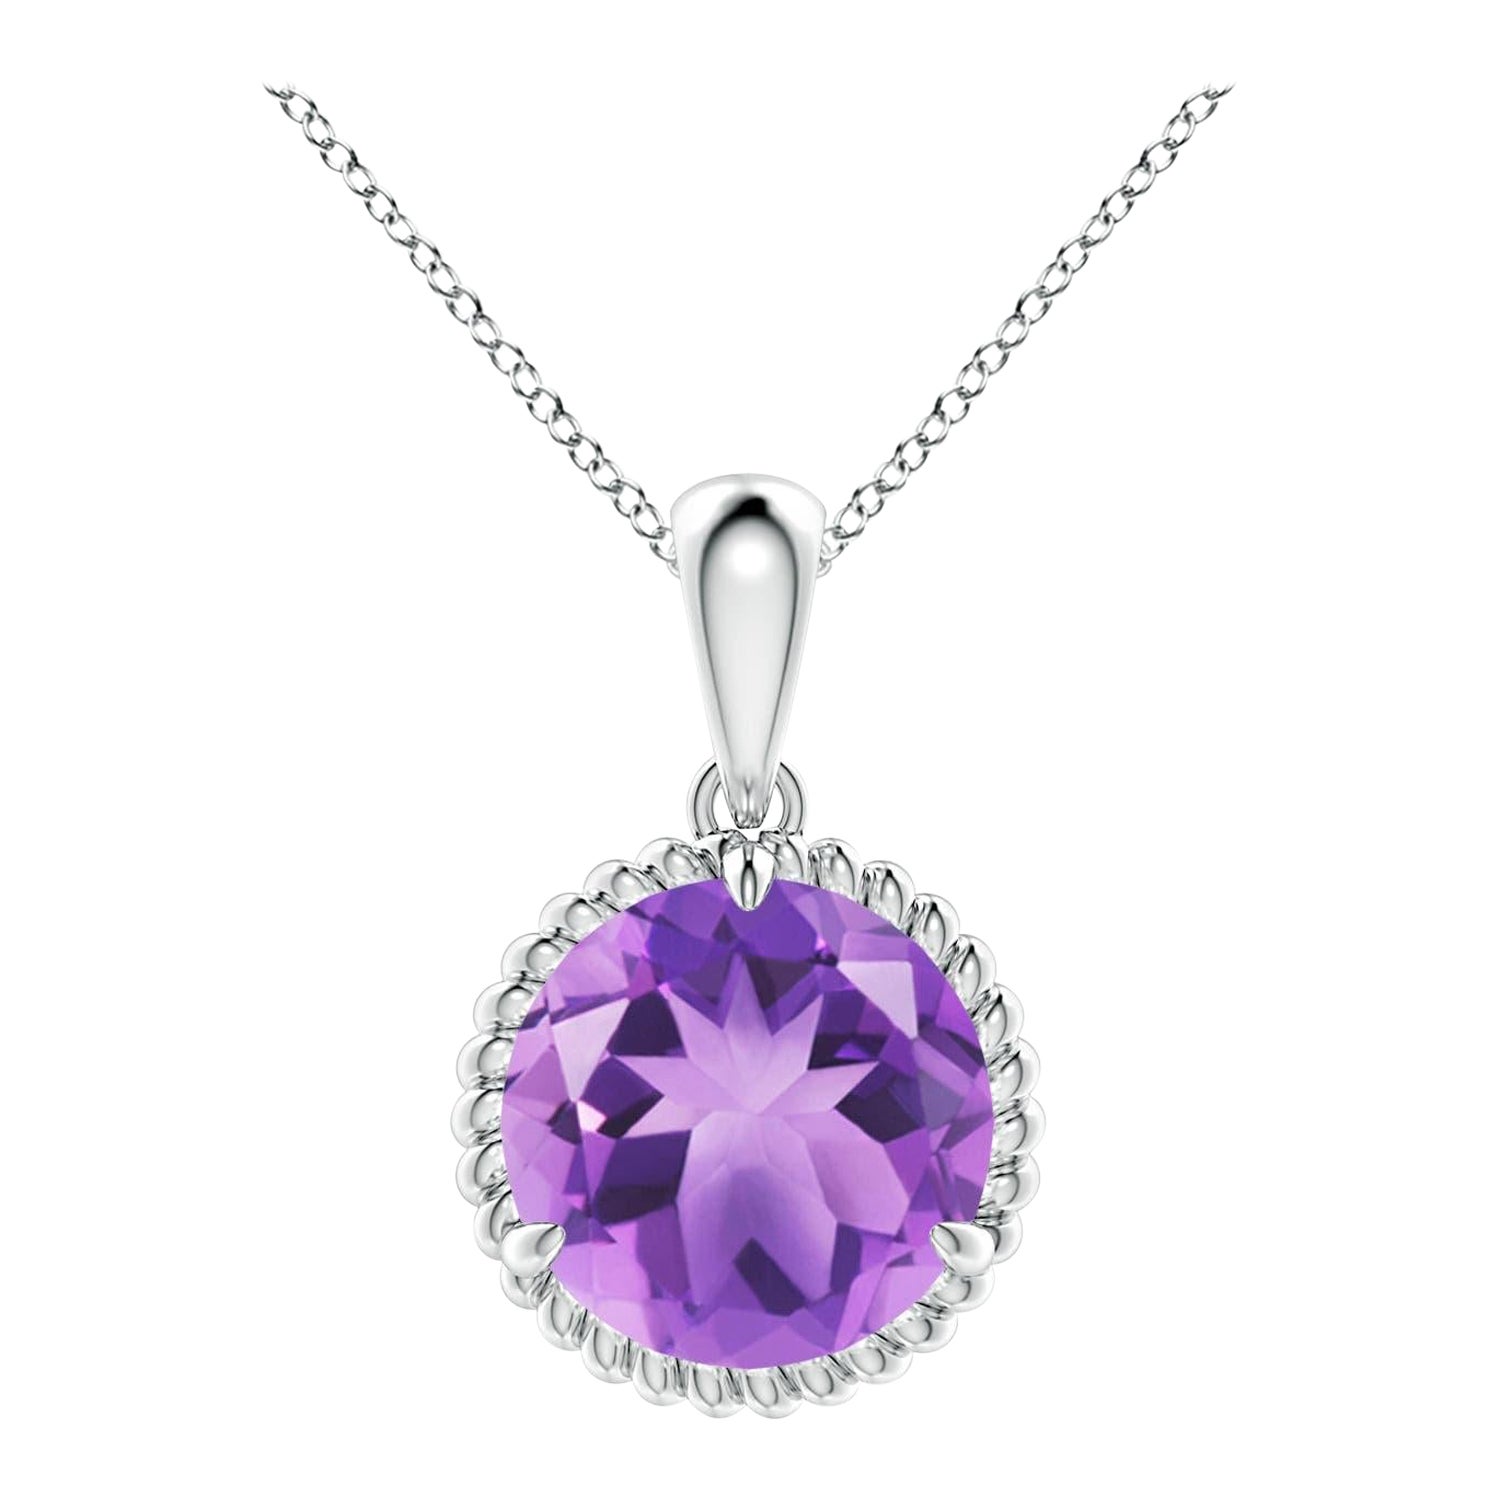 Natural Rope-Framed 2.45ct Amethyst Solitaire Pendant in Platinum